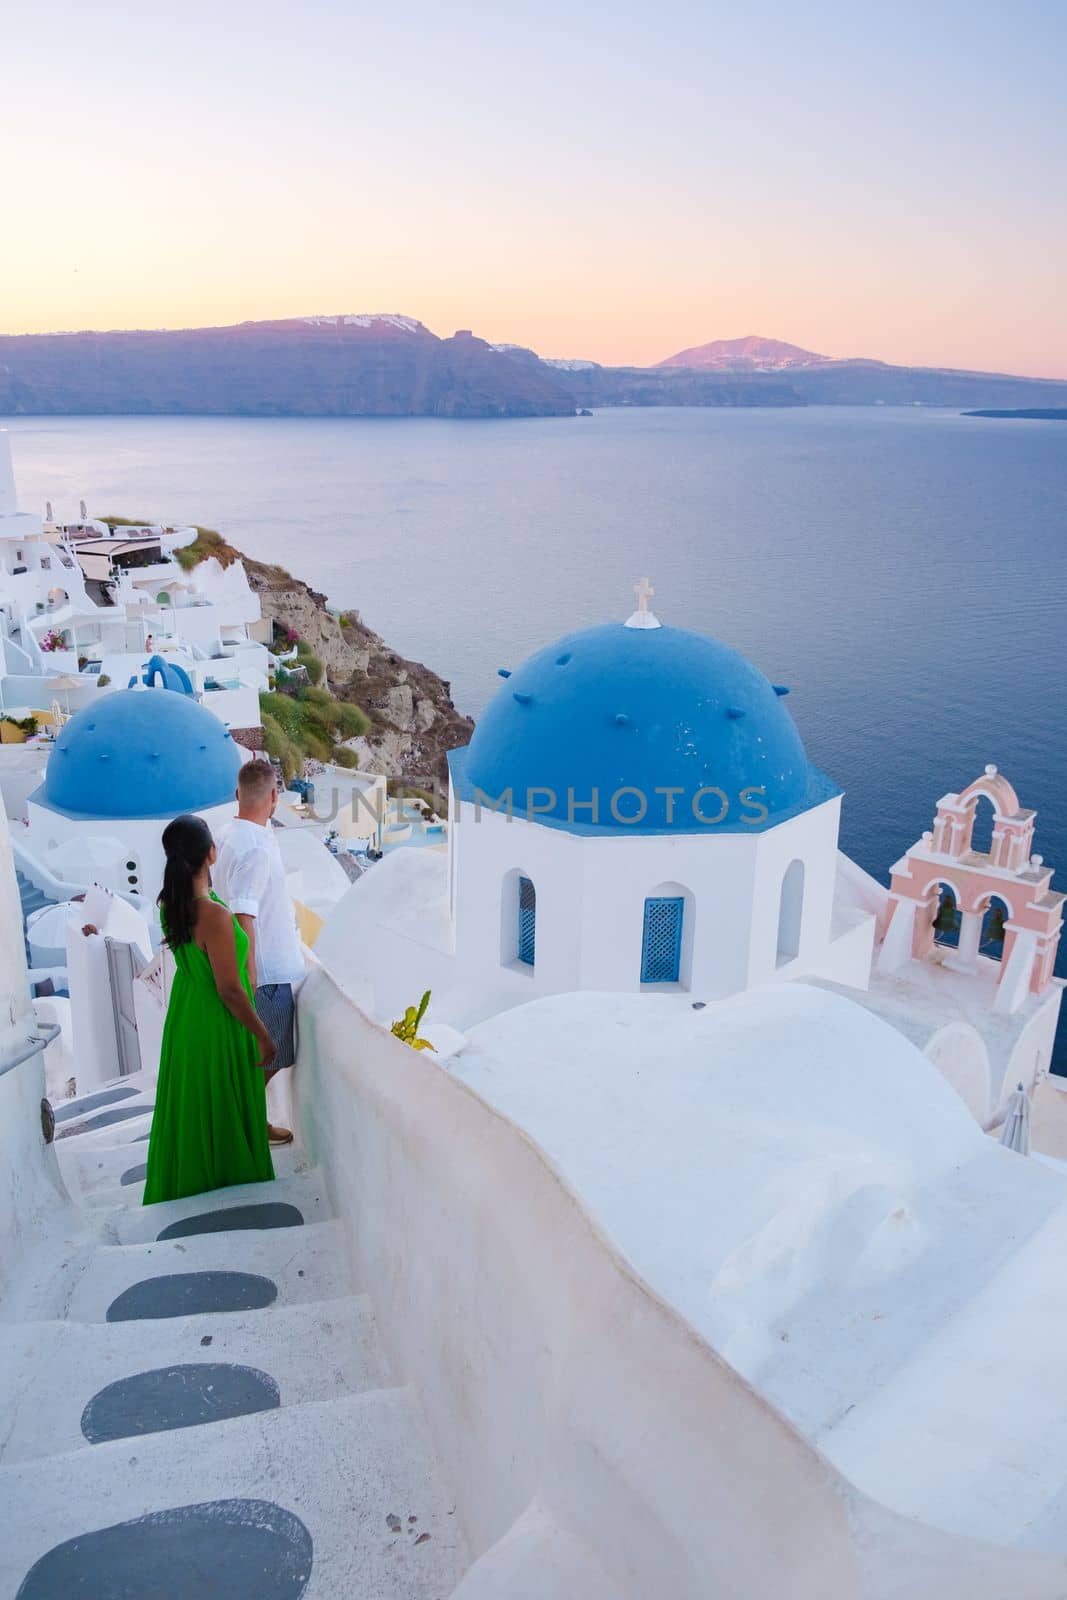 Couple on vacation in Santorini Greece, and men and women at the Greek village of Oia with a view over the ocean during summer vacation